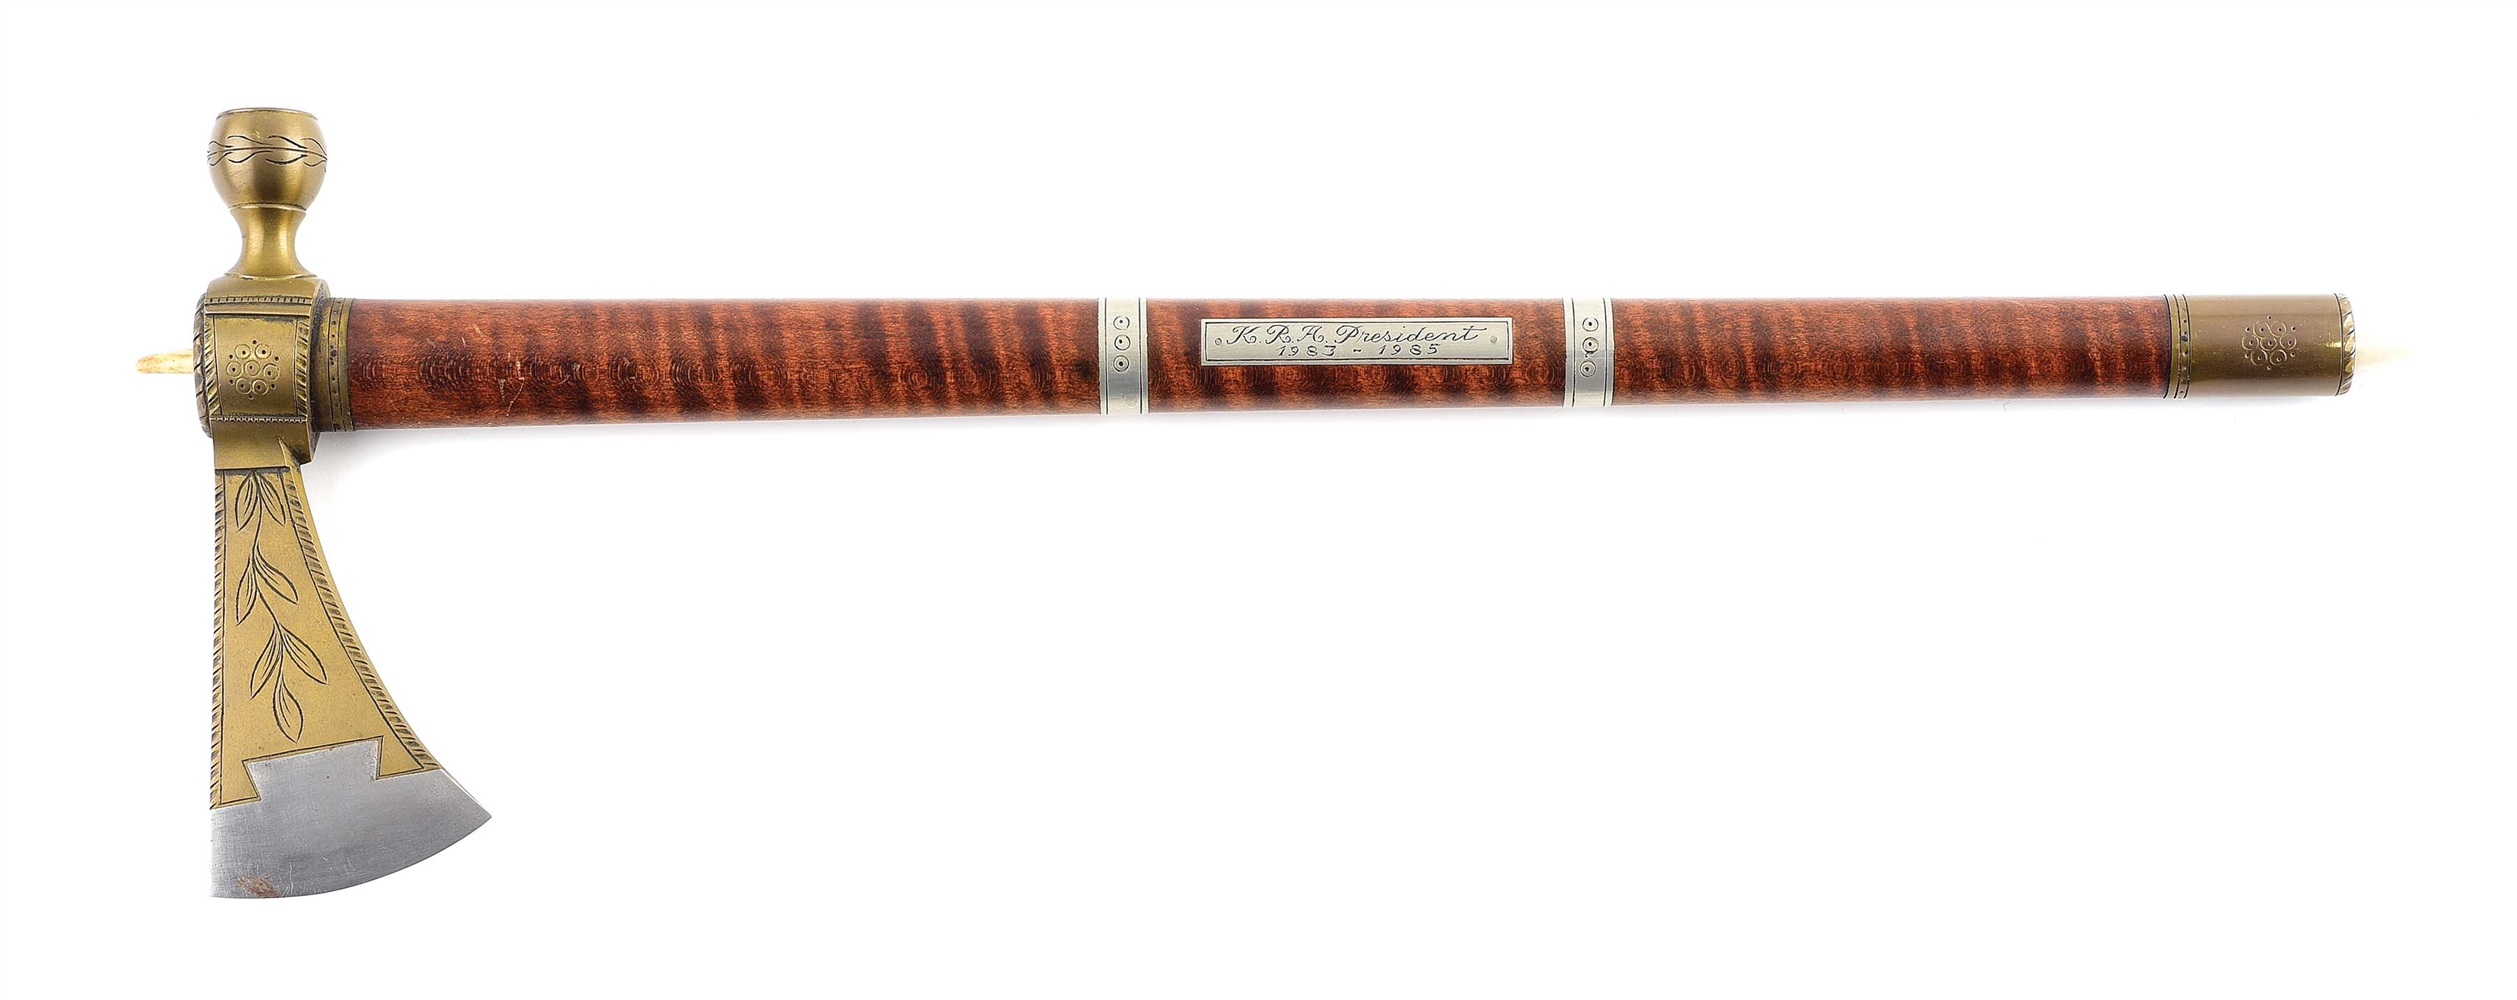 CONTEMPORARY KRA PIPE TOMAHAWK FOR GERALD DICESARE, PRESIDENT, 1983-1985.